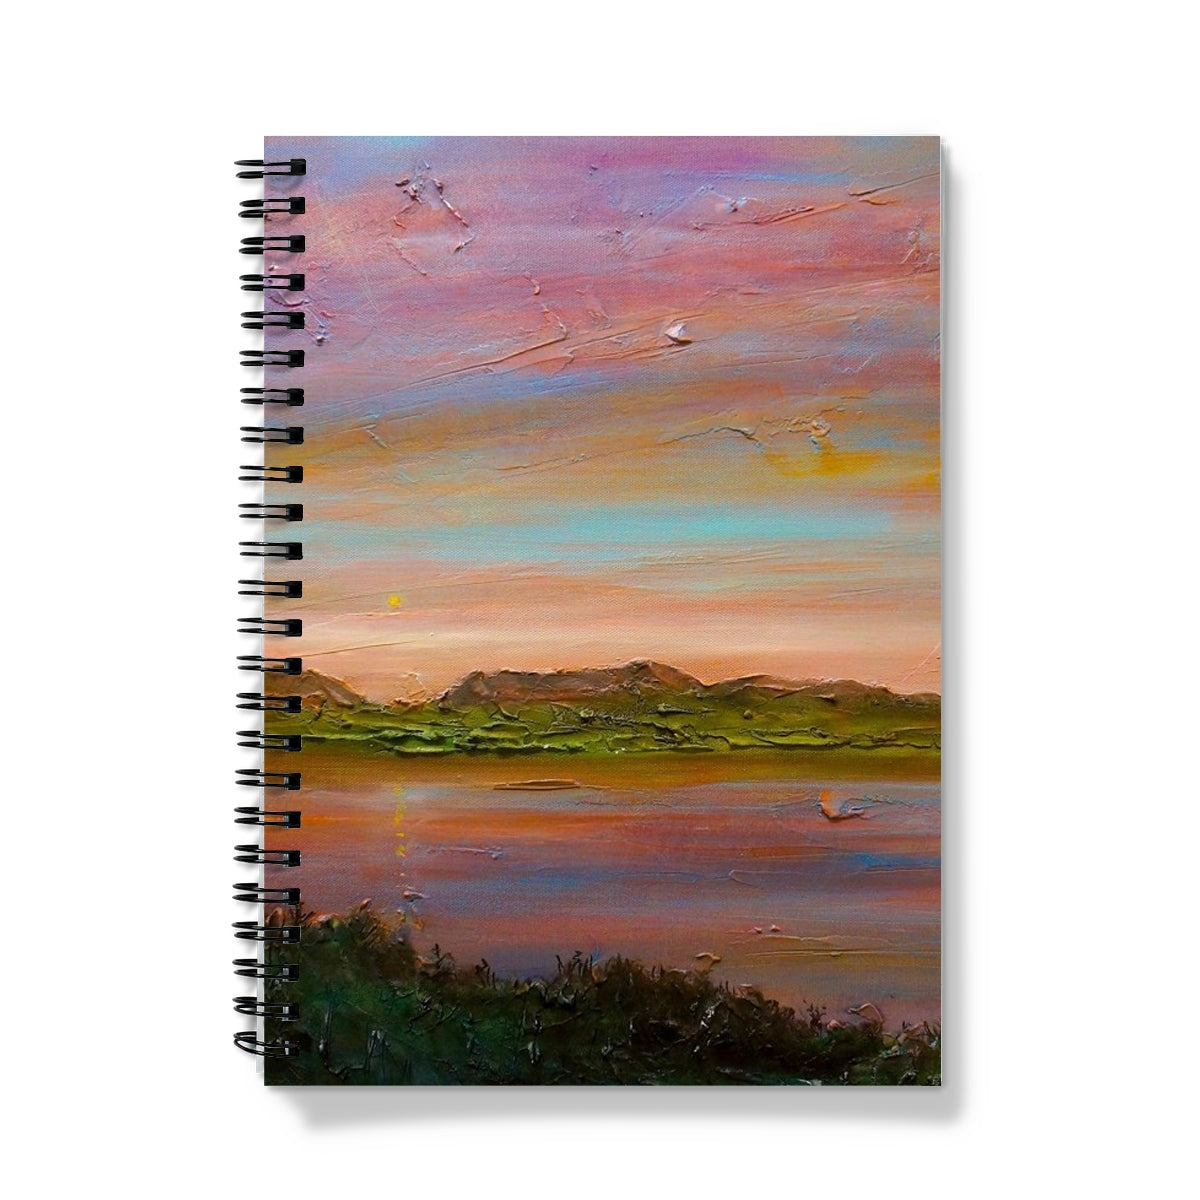 Gourock Golf Club Sunset Art Gifts Notebook-Journals & Notebooks-River Clyde Art Gallery-A5-Graph-Paintings, Prints, Homeware, Art Gifts From Scotland By Scottish Artist Kevin Hunter